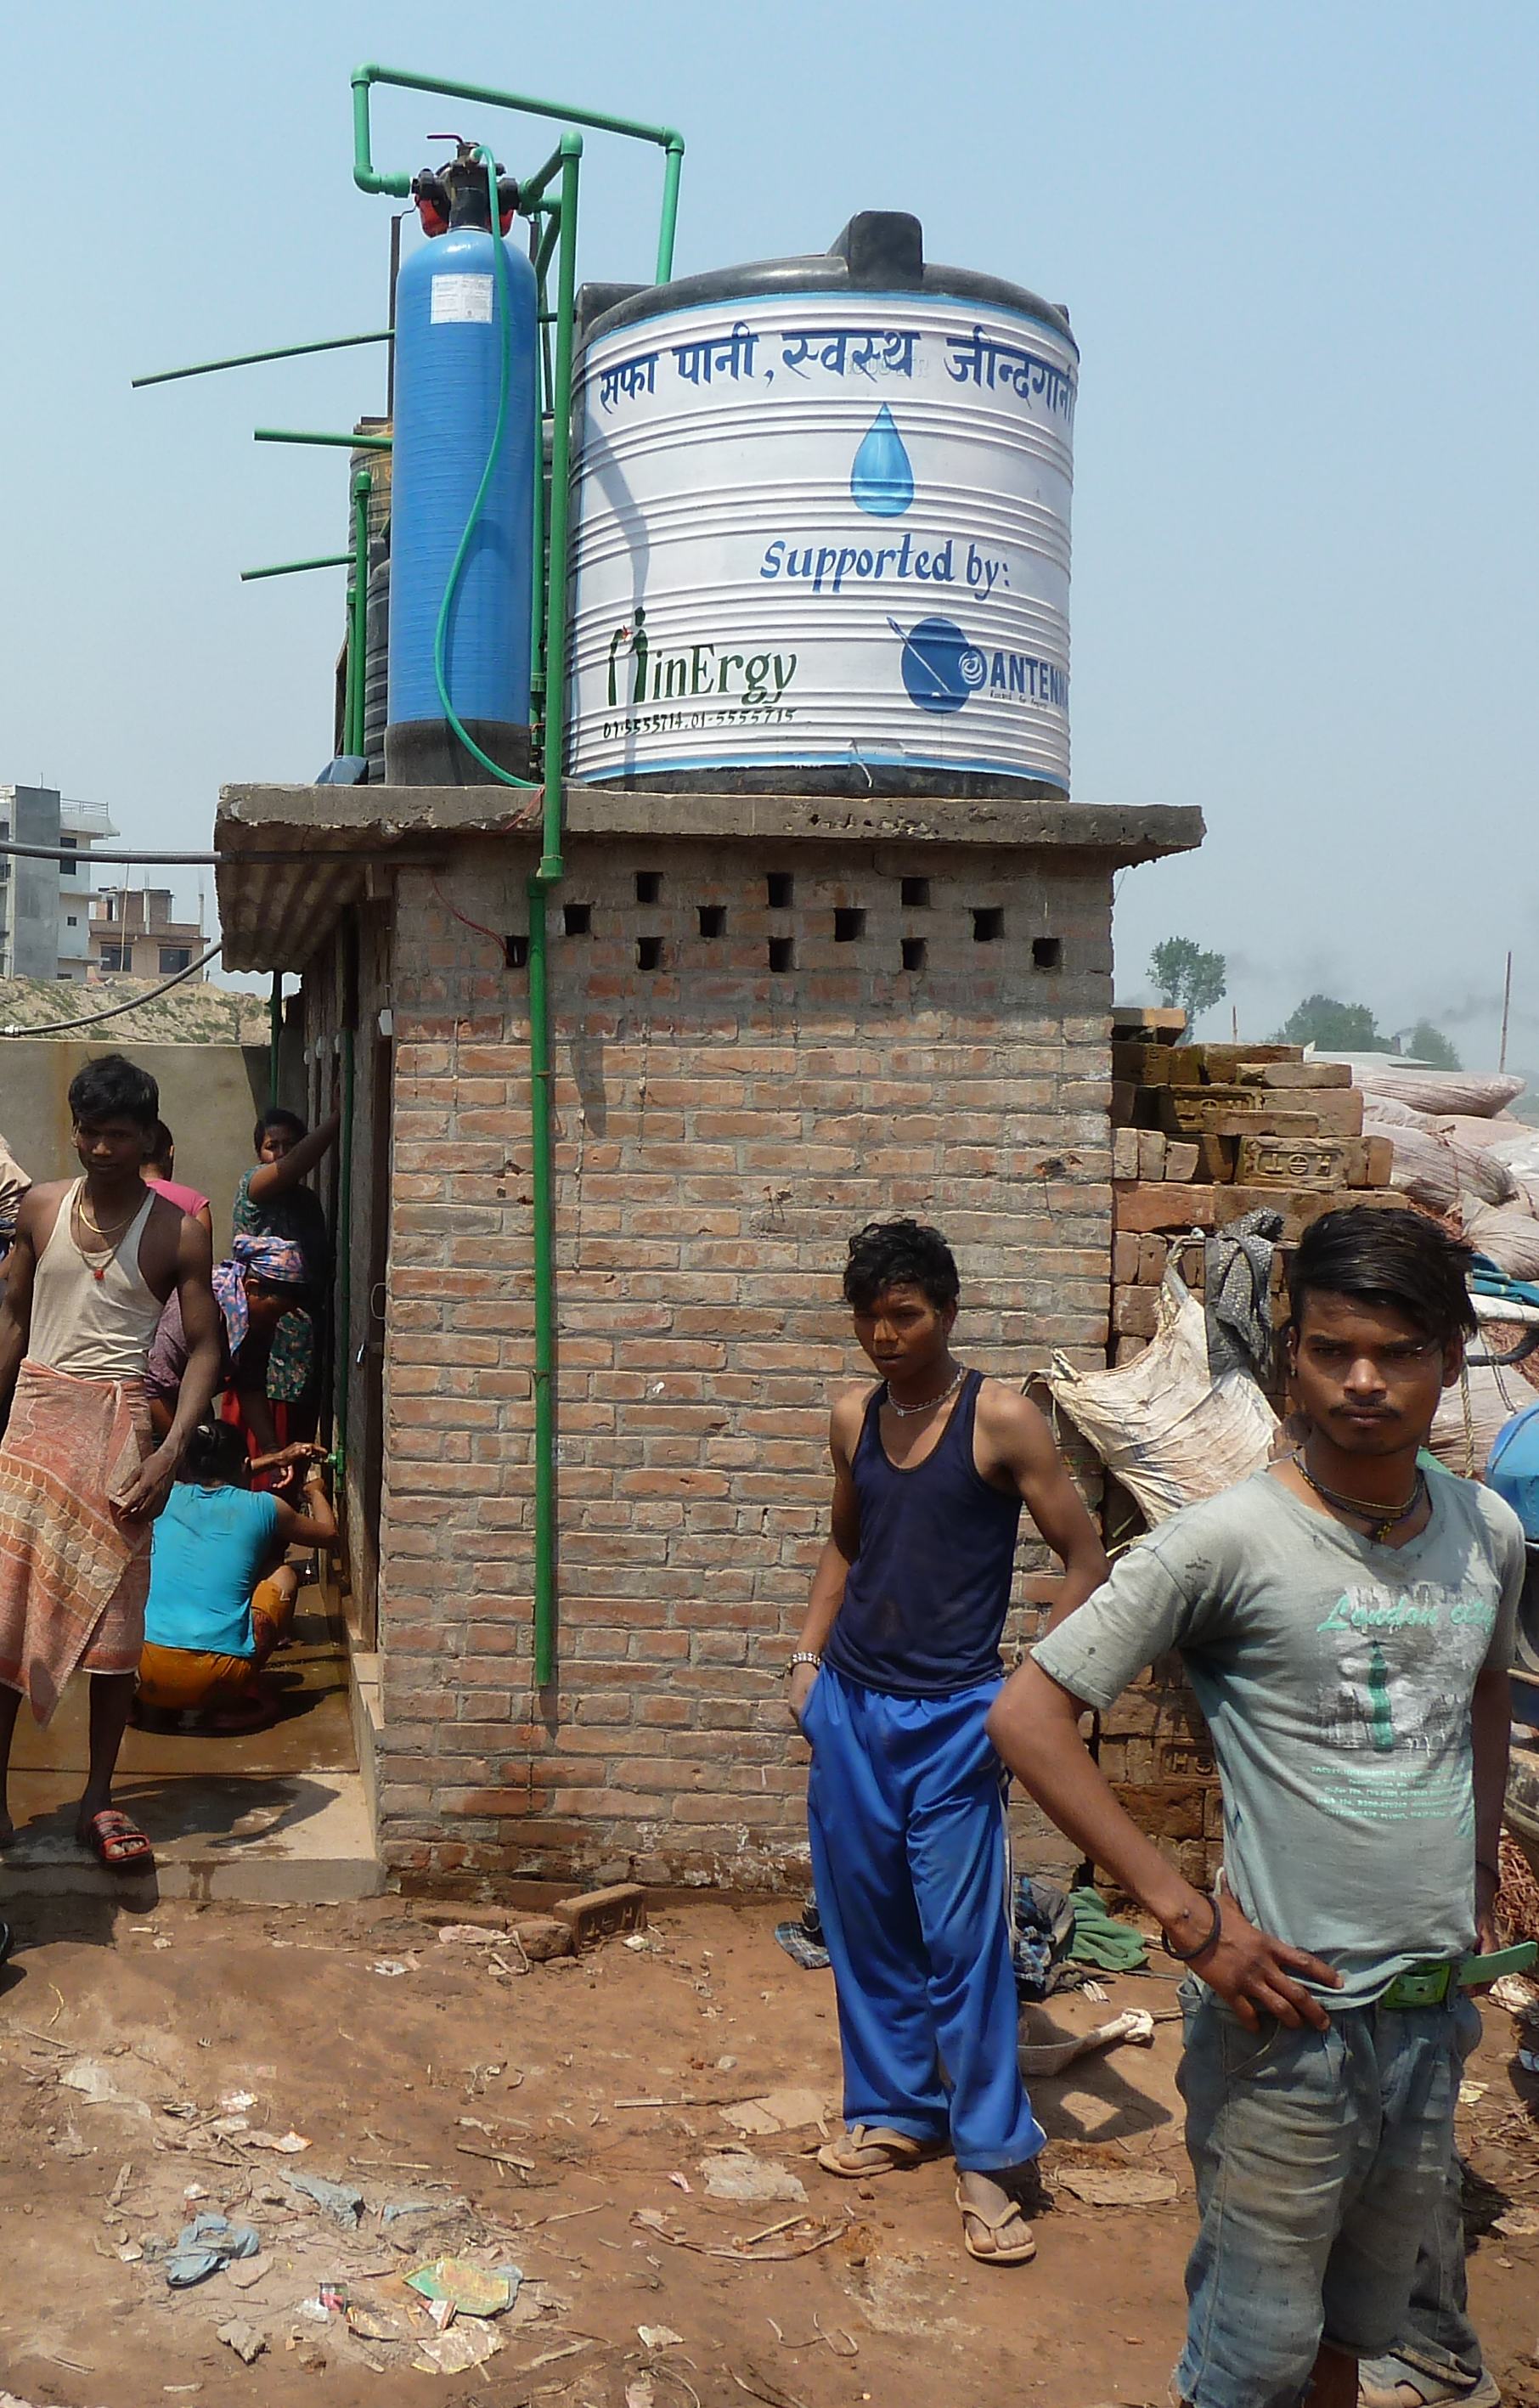 Water purification unit and storage tank for chlorination on brick kiln premises in the Kathmandu Valley. Source: Antenna (2017)